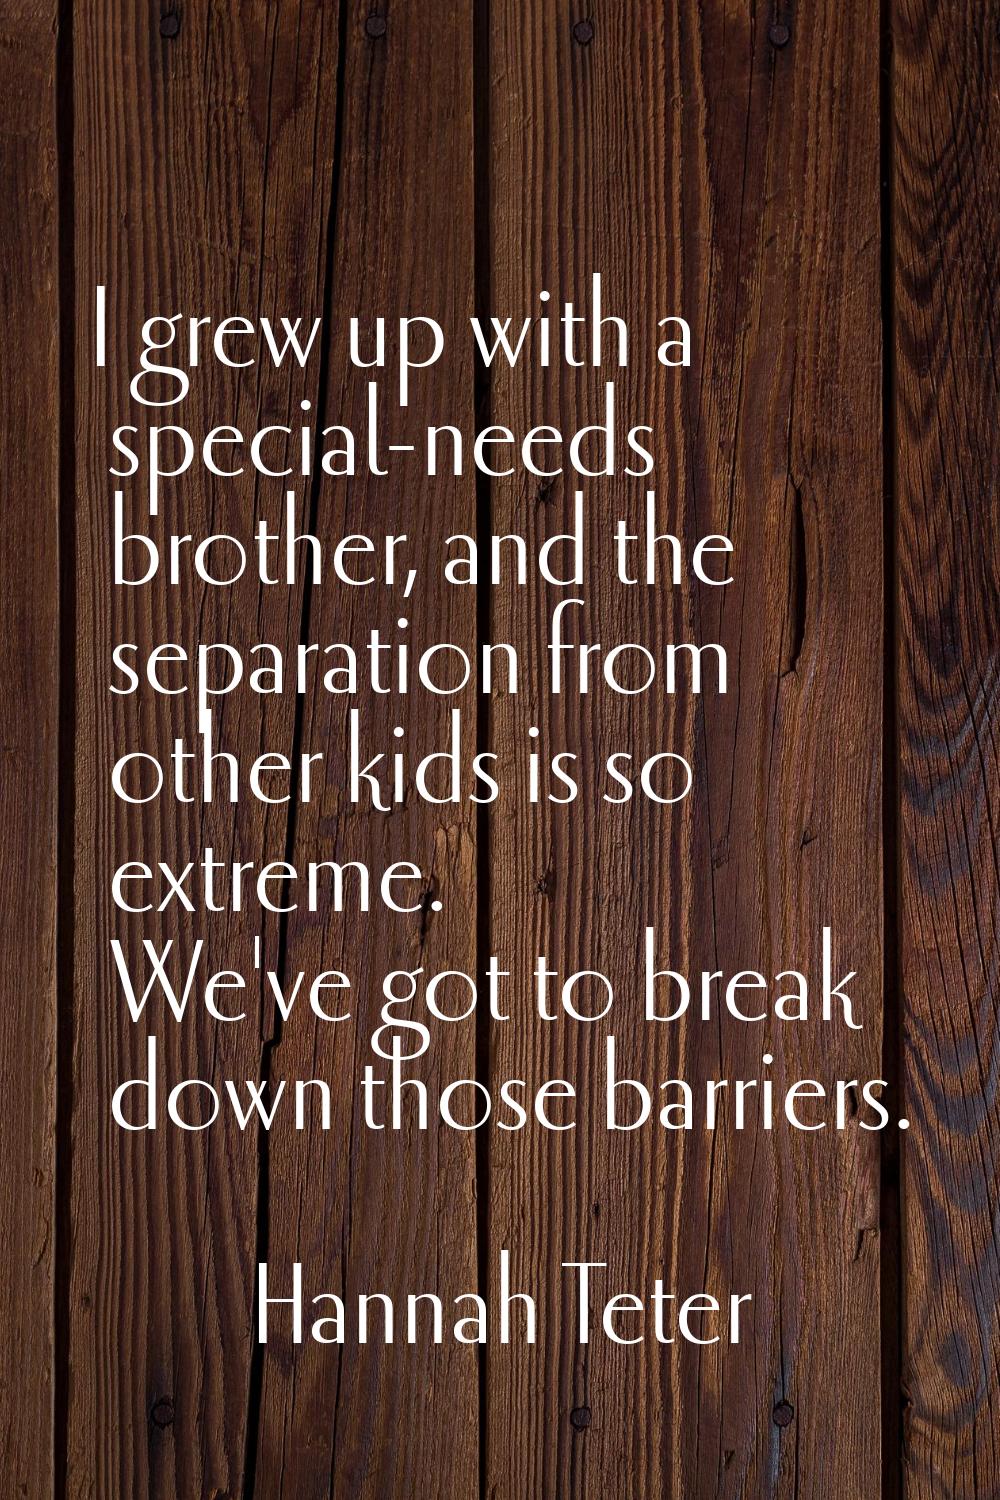 I grew up with a special-needs brother, and the separation from other kids is so extreme. We've got